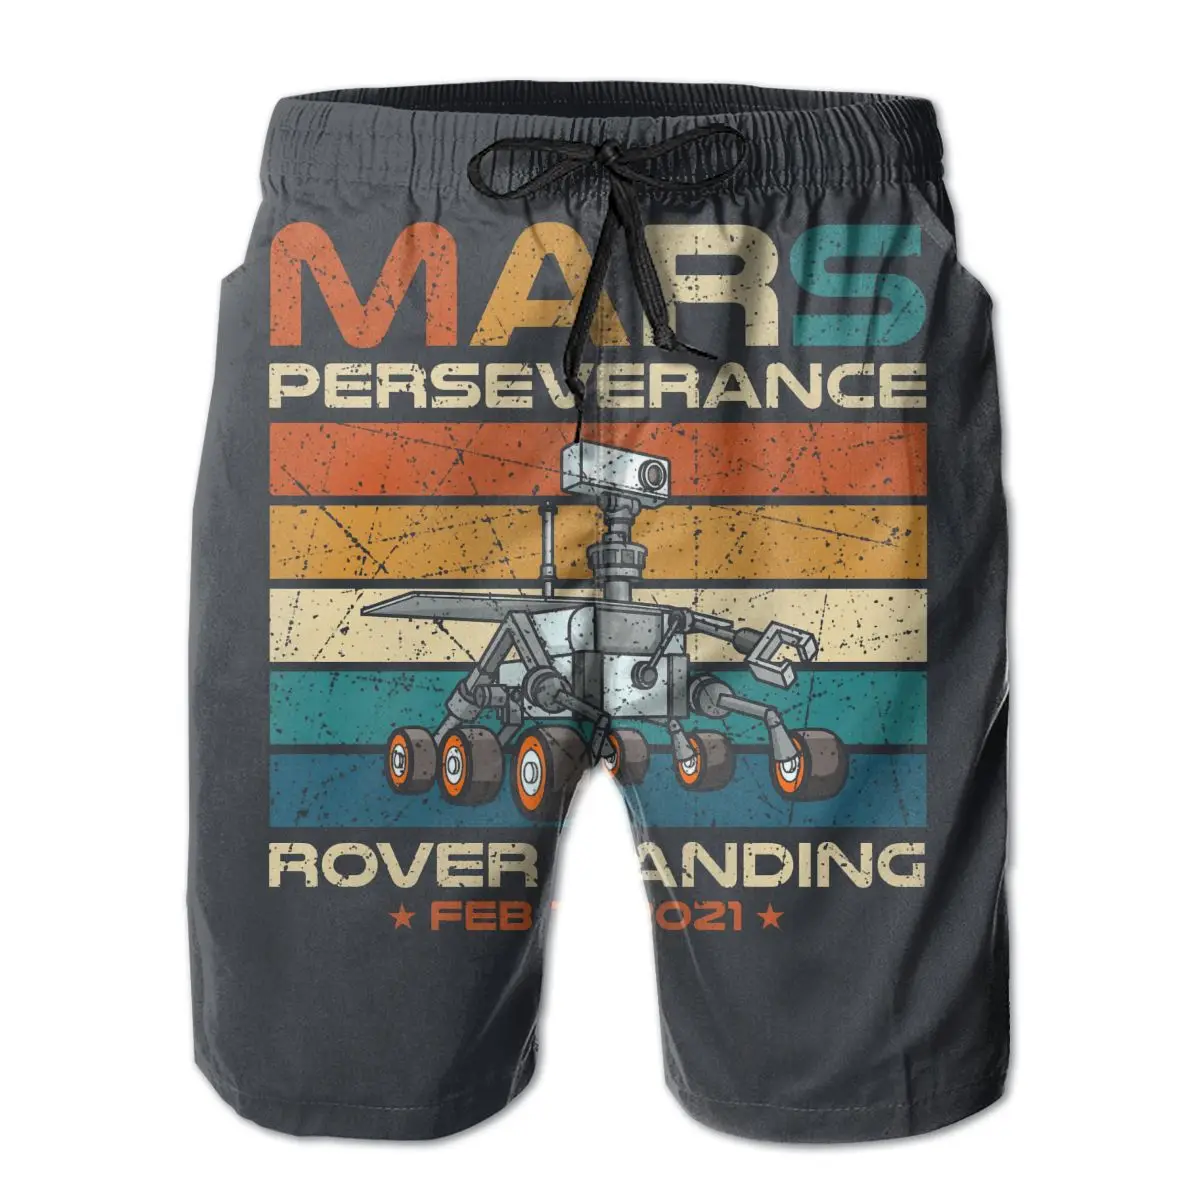 

Causal Breathable Quick Dry Humor Graphic Mars, Astronomy Sports Perseverance The New Mars Rover 2021 Mission2 Hawaii Pants